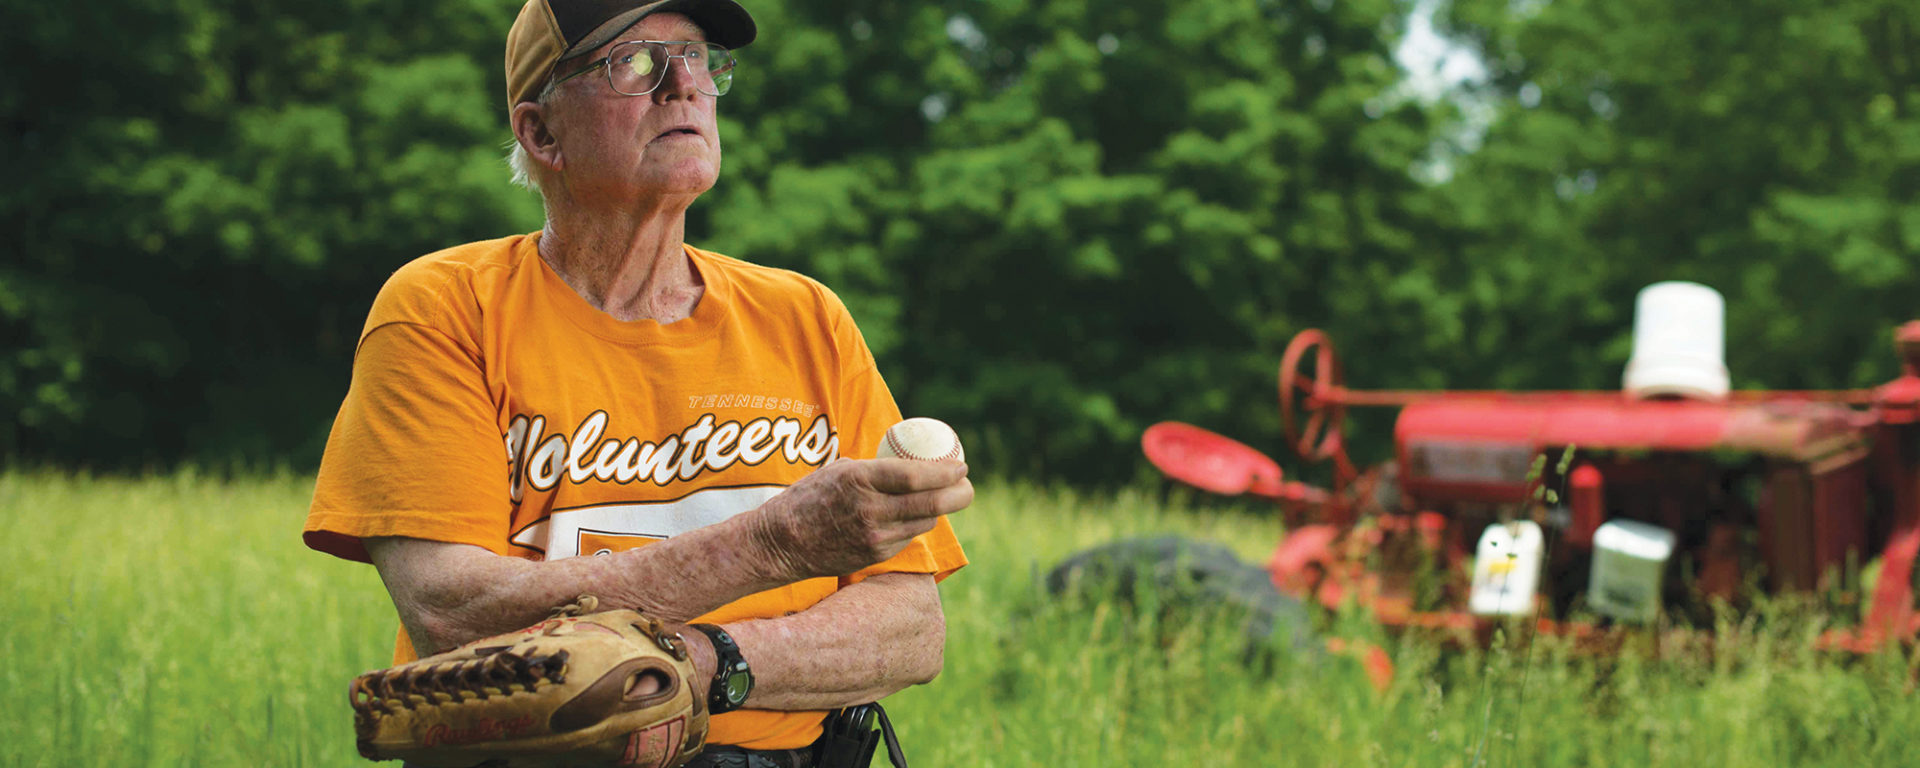 Randall Crowell pictured on his farm in UT orange tshirt, holding a baseball and glove.